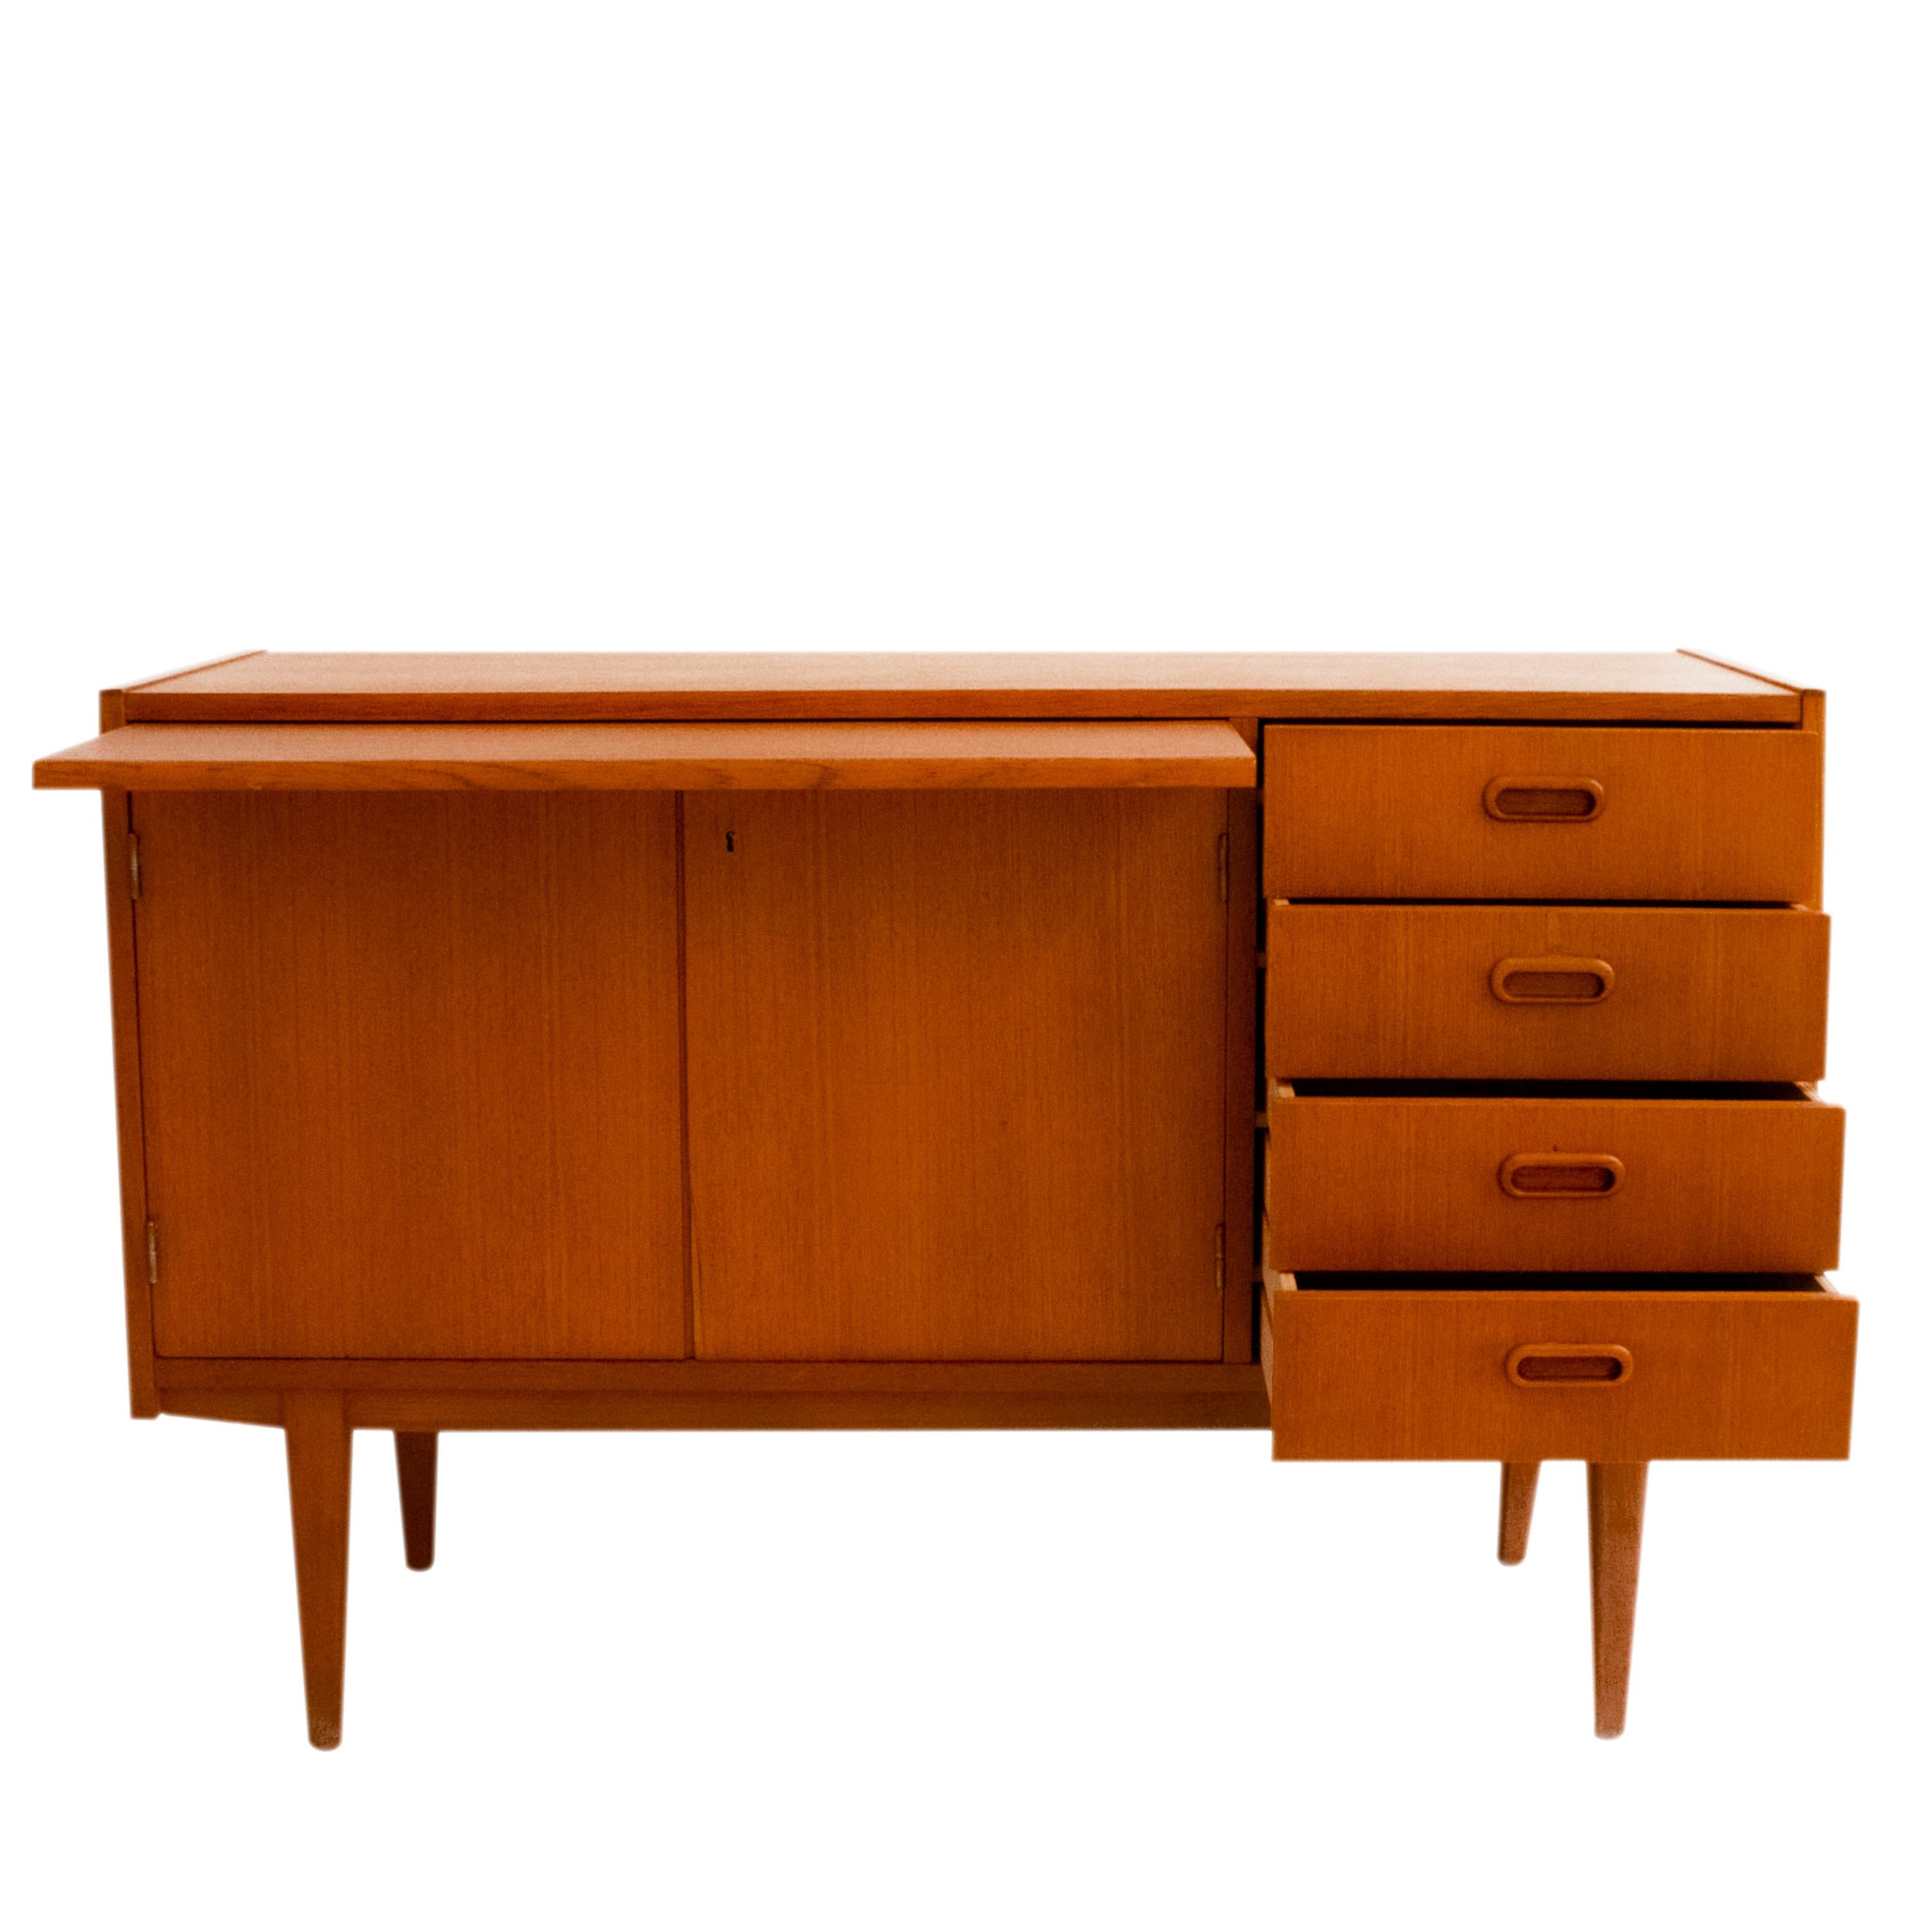 Danish sideboard made of teak wood. It is made up of a 4-drawer module, a two-door module with storage space with a height-adjustable shelf and a removable upper tray.